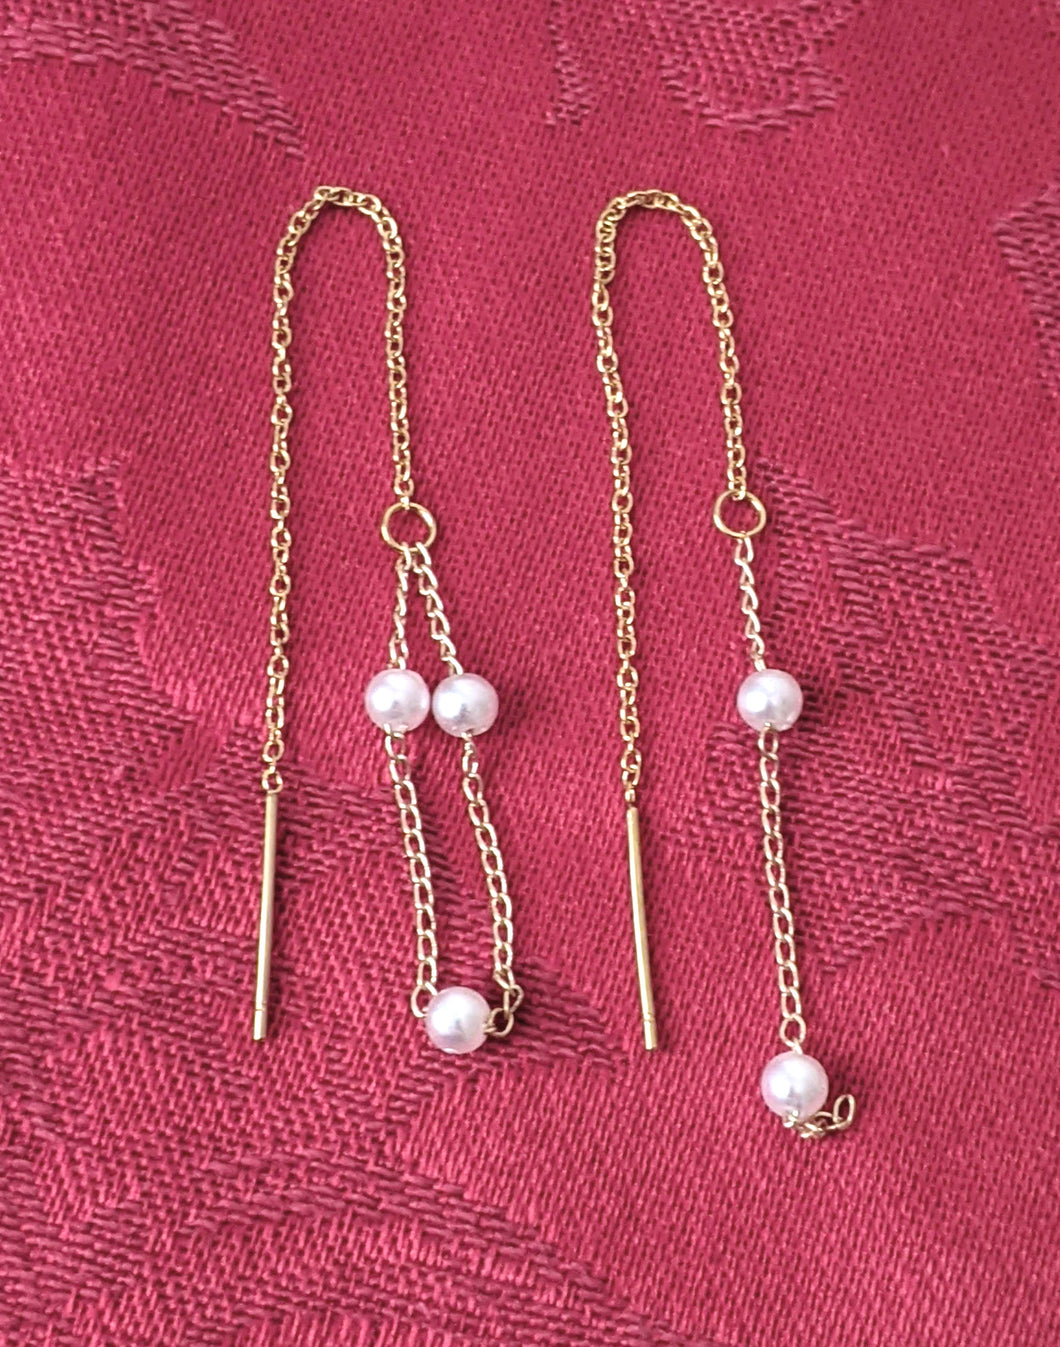 Pearl Chain Threader Earrings: Mismatched Earrings